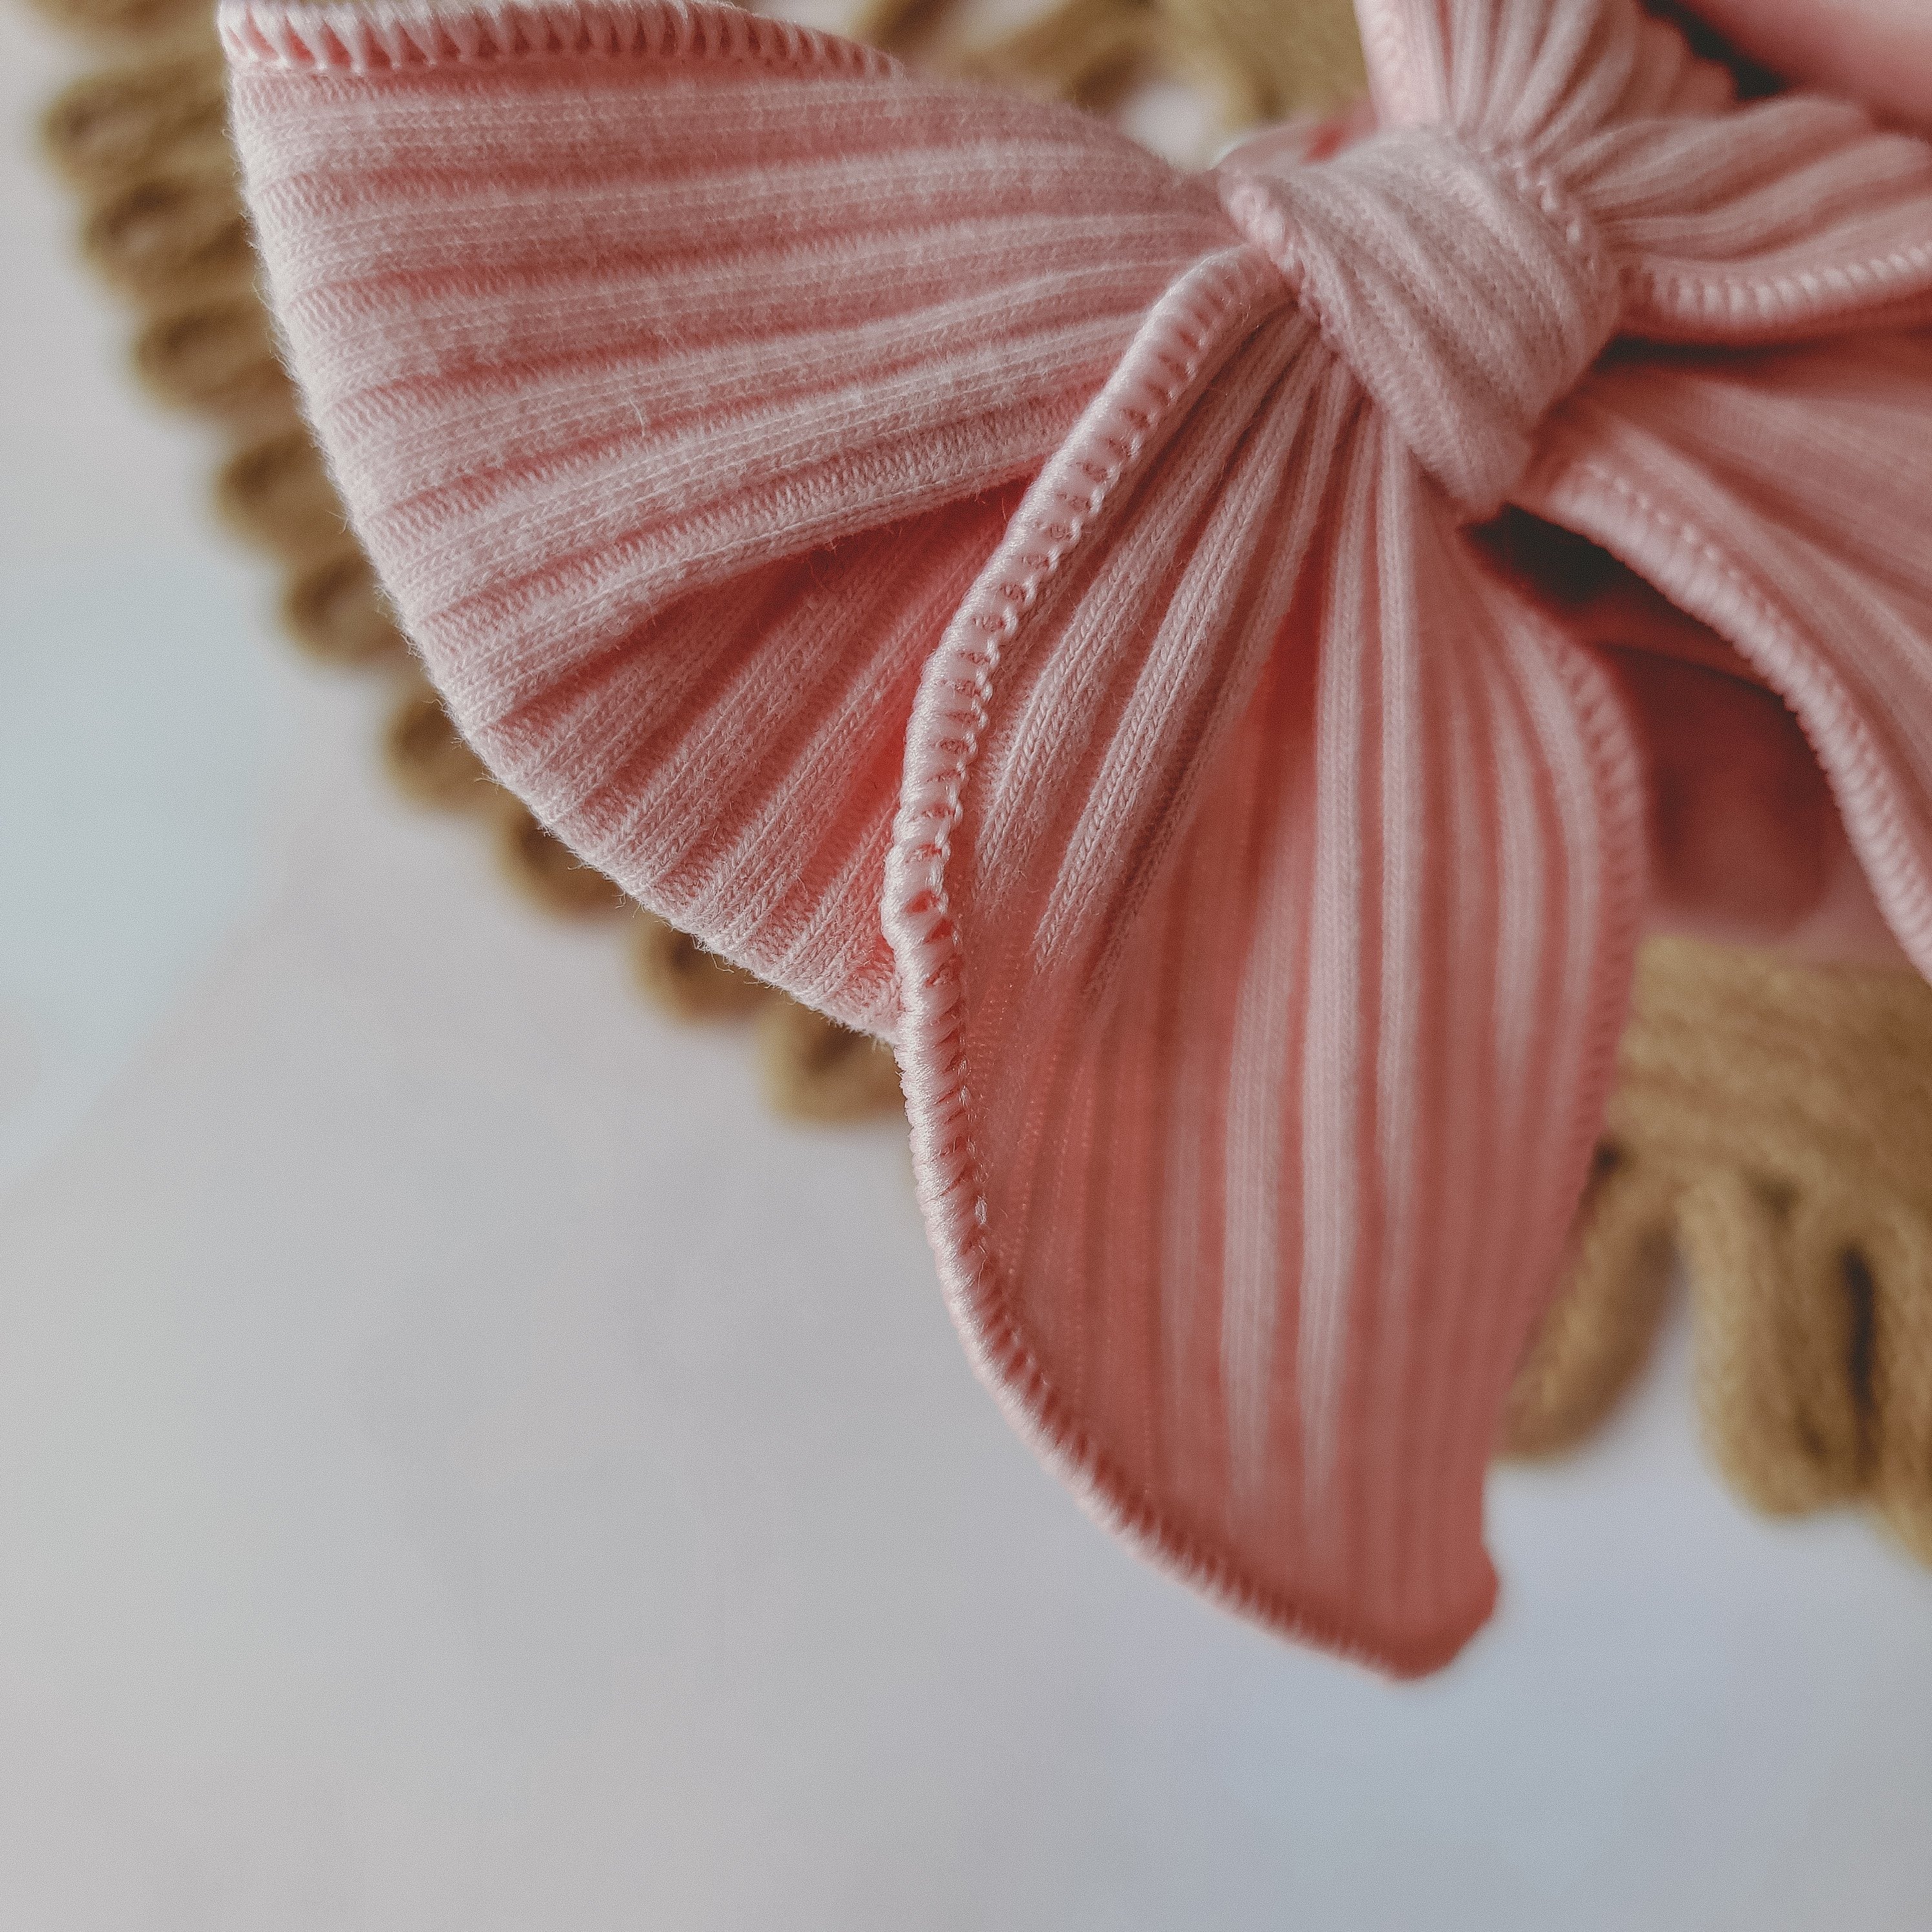 WHIMSY BOW // ROUGE RIB KNIT - Elisa’s Little Blossoms